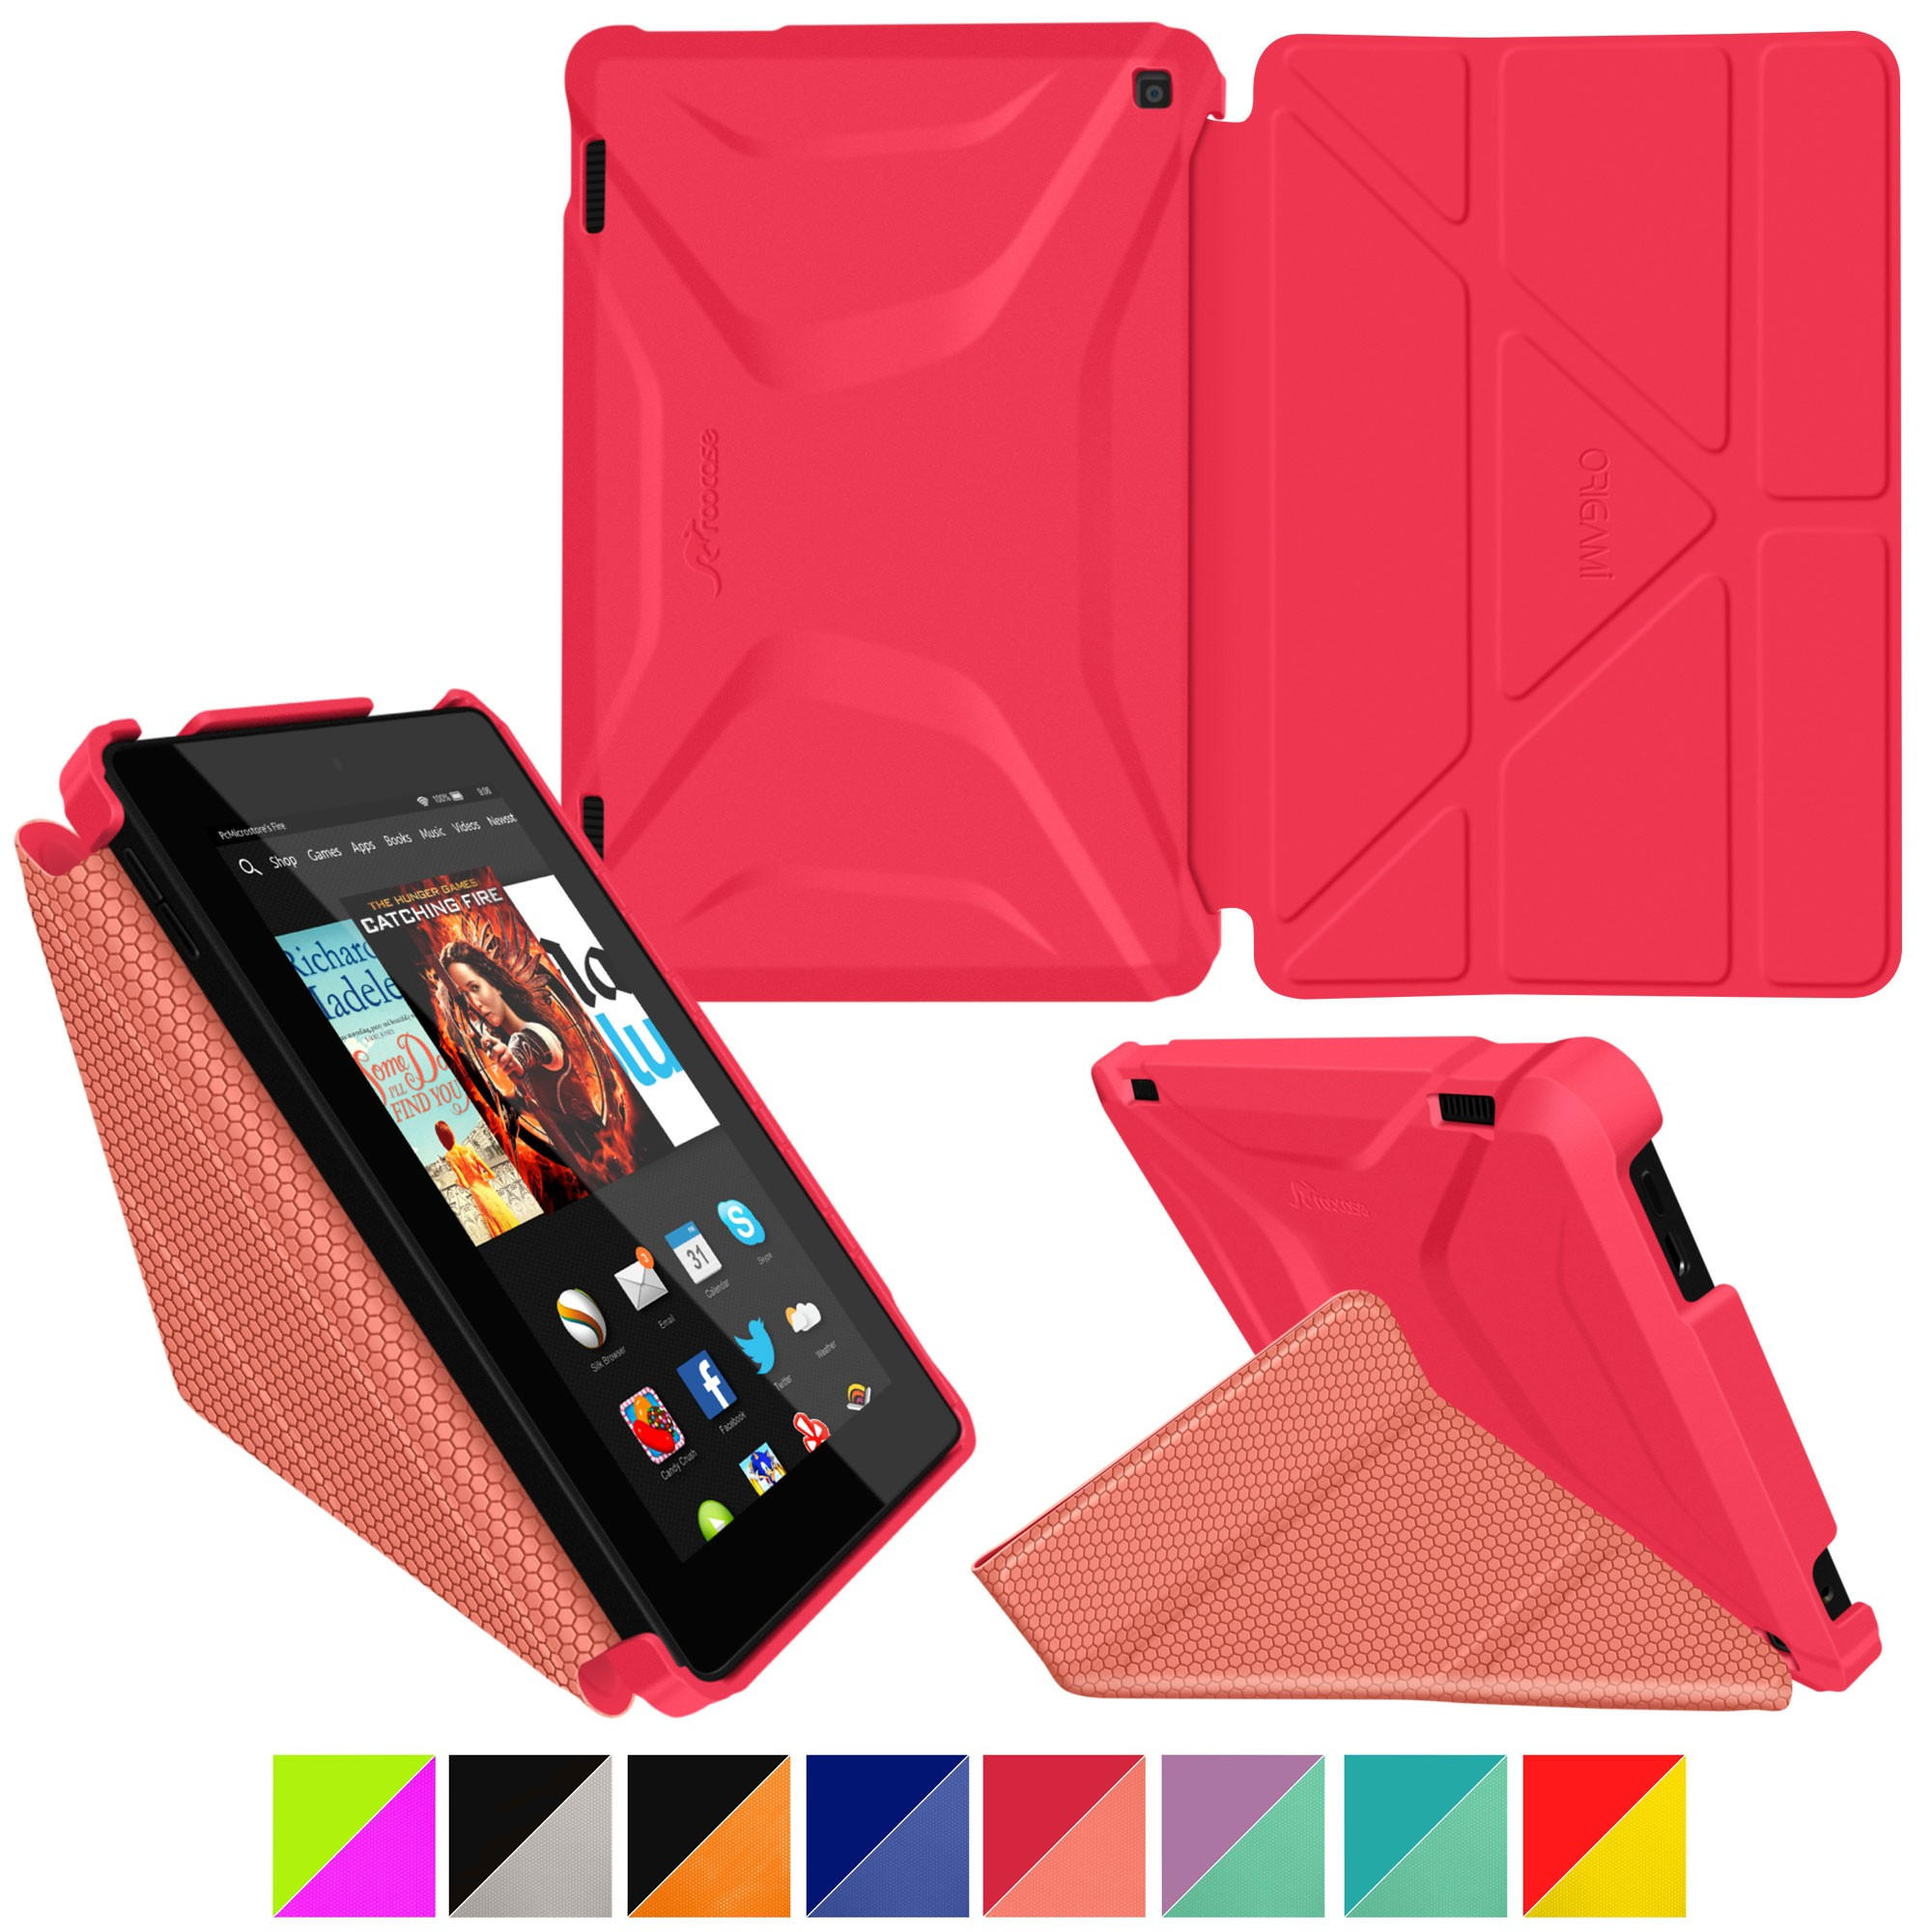 Origami Tablet Case Fire Hd 7 2014 Case Roocase New Kindle Fire Hd 7 Origami 3d Slim